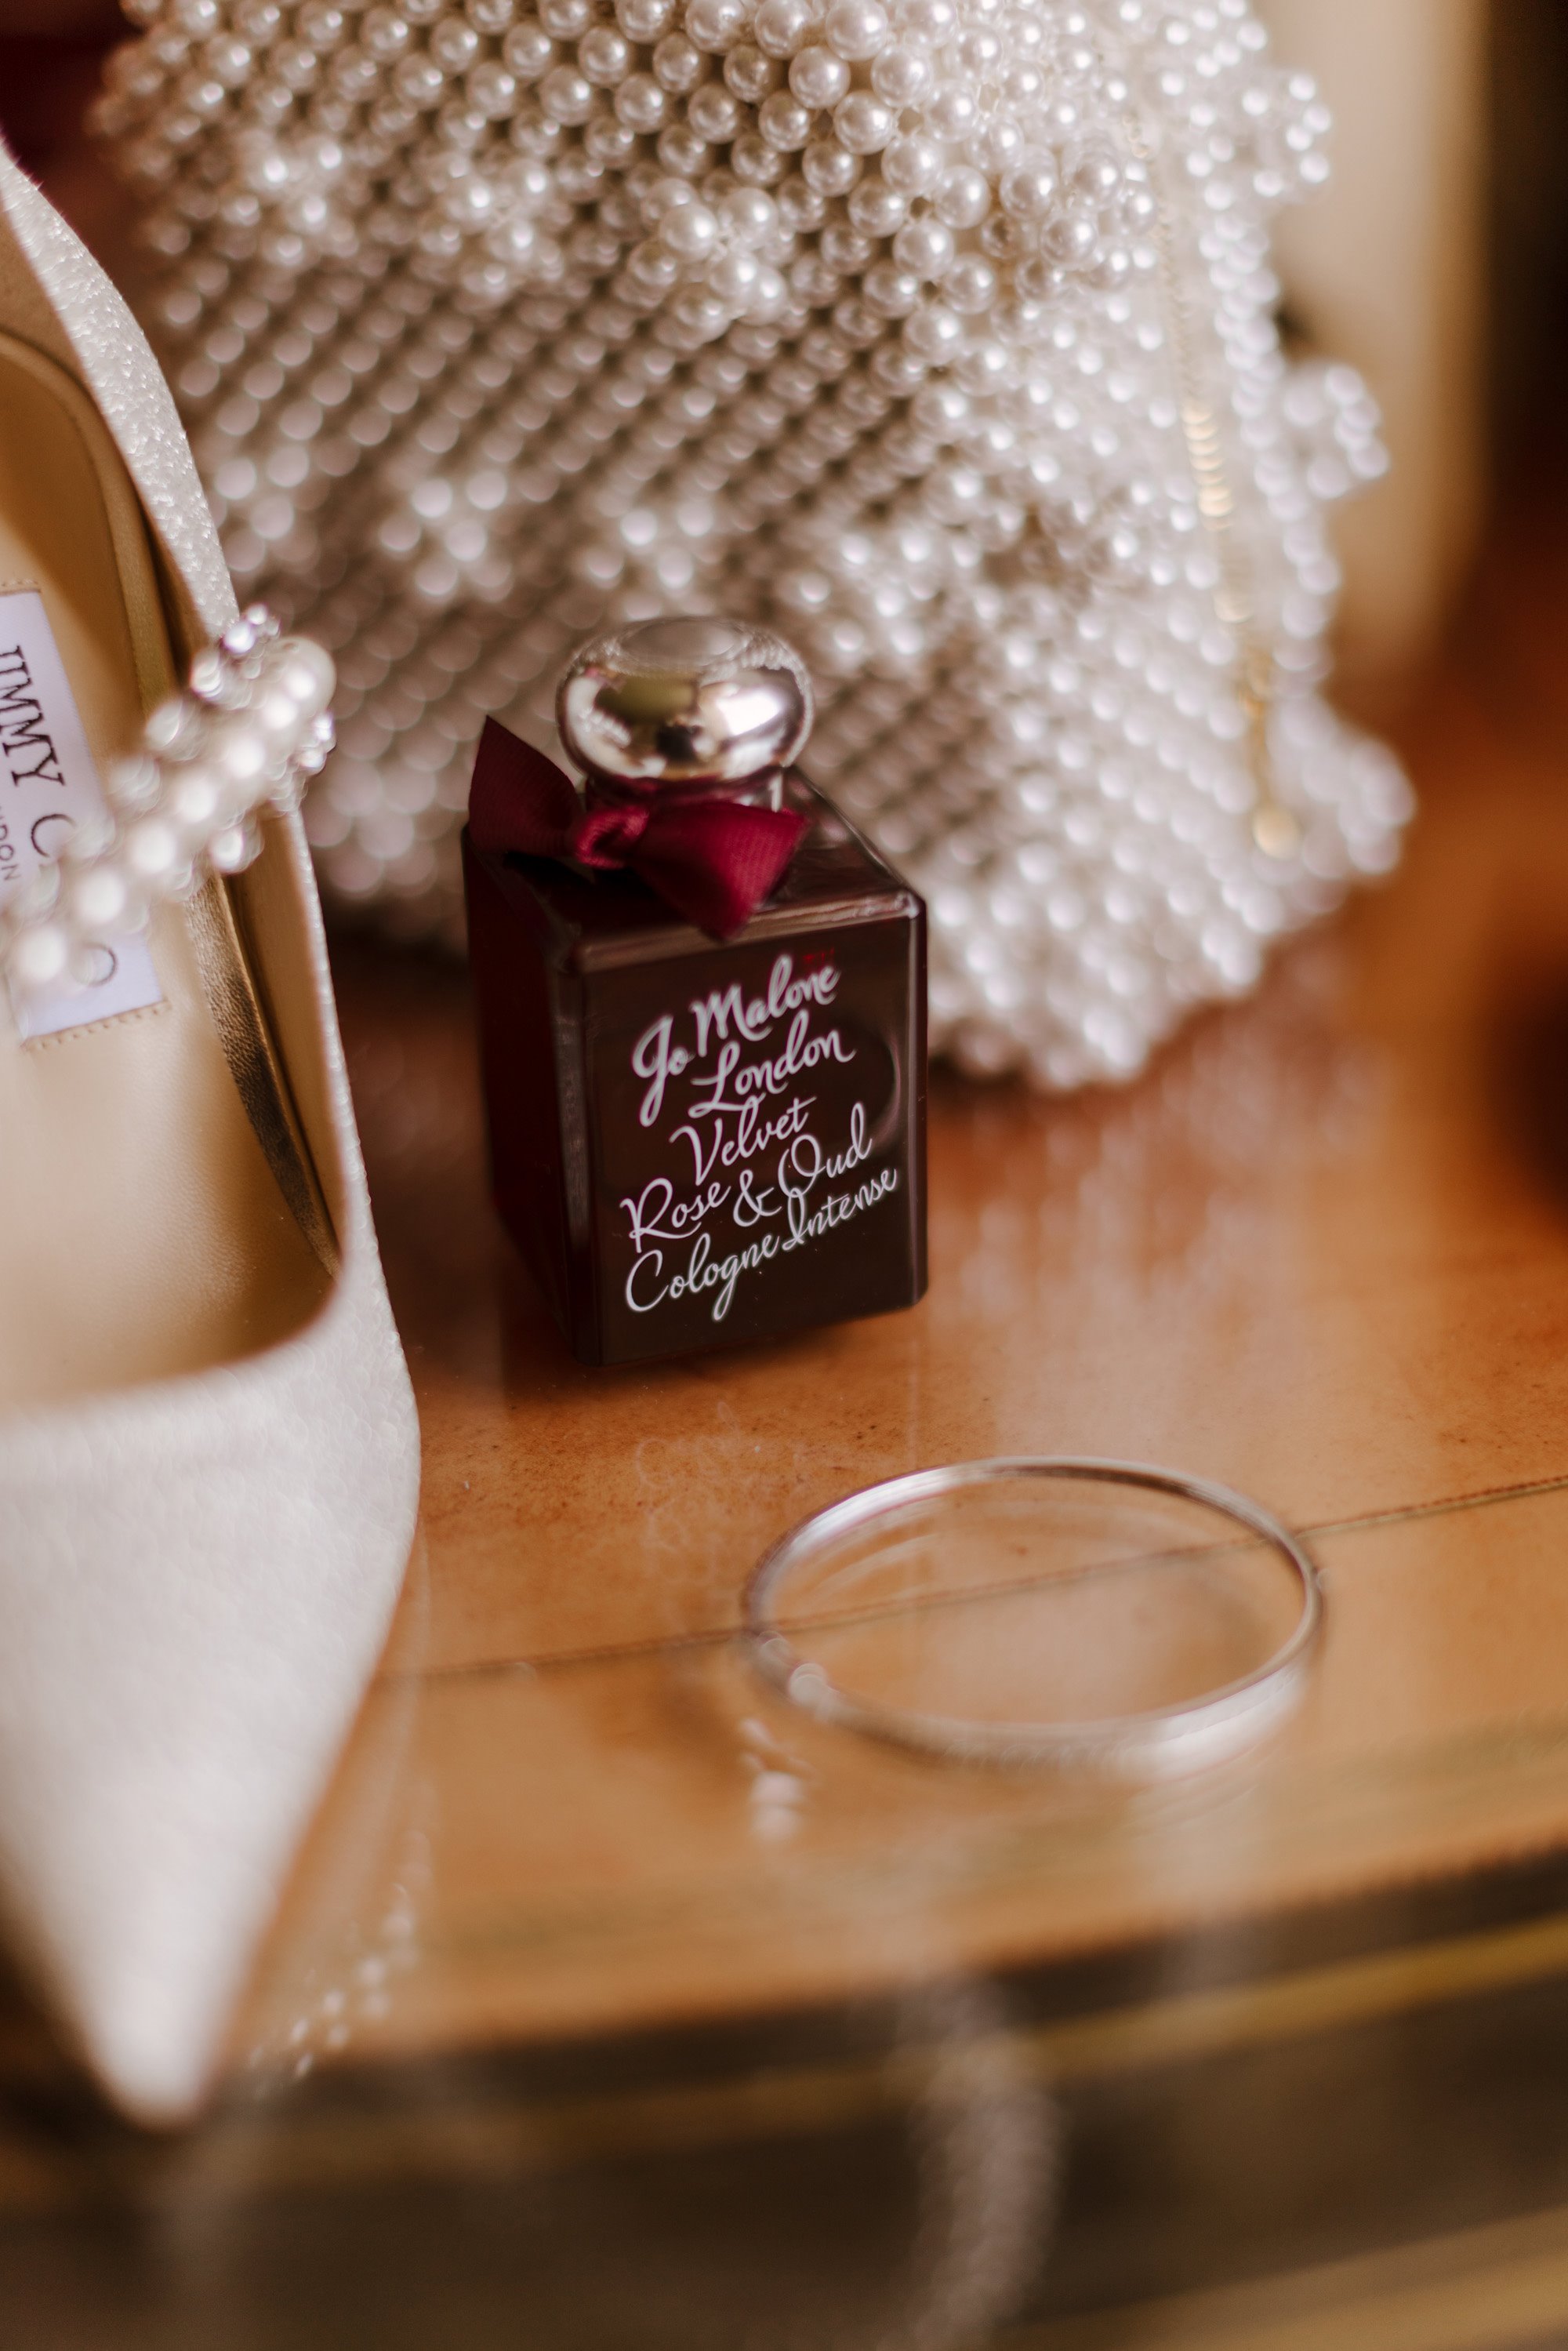 Jimmy choo wedding shoes with pearl strap and pearl handbag by shrimps next to Jo malone perfume bottle on dressing table 